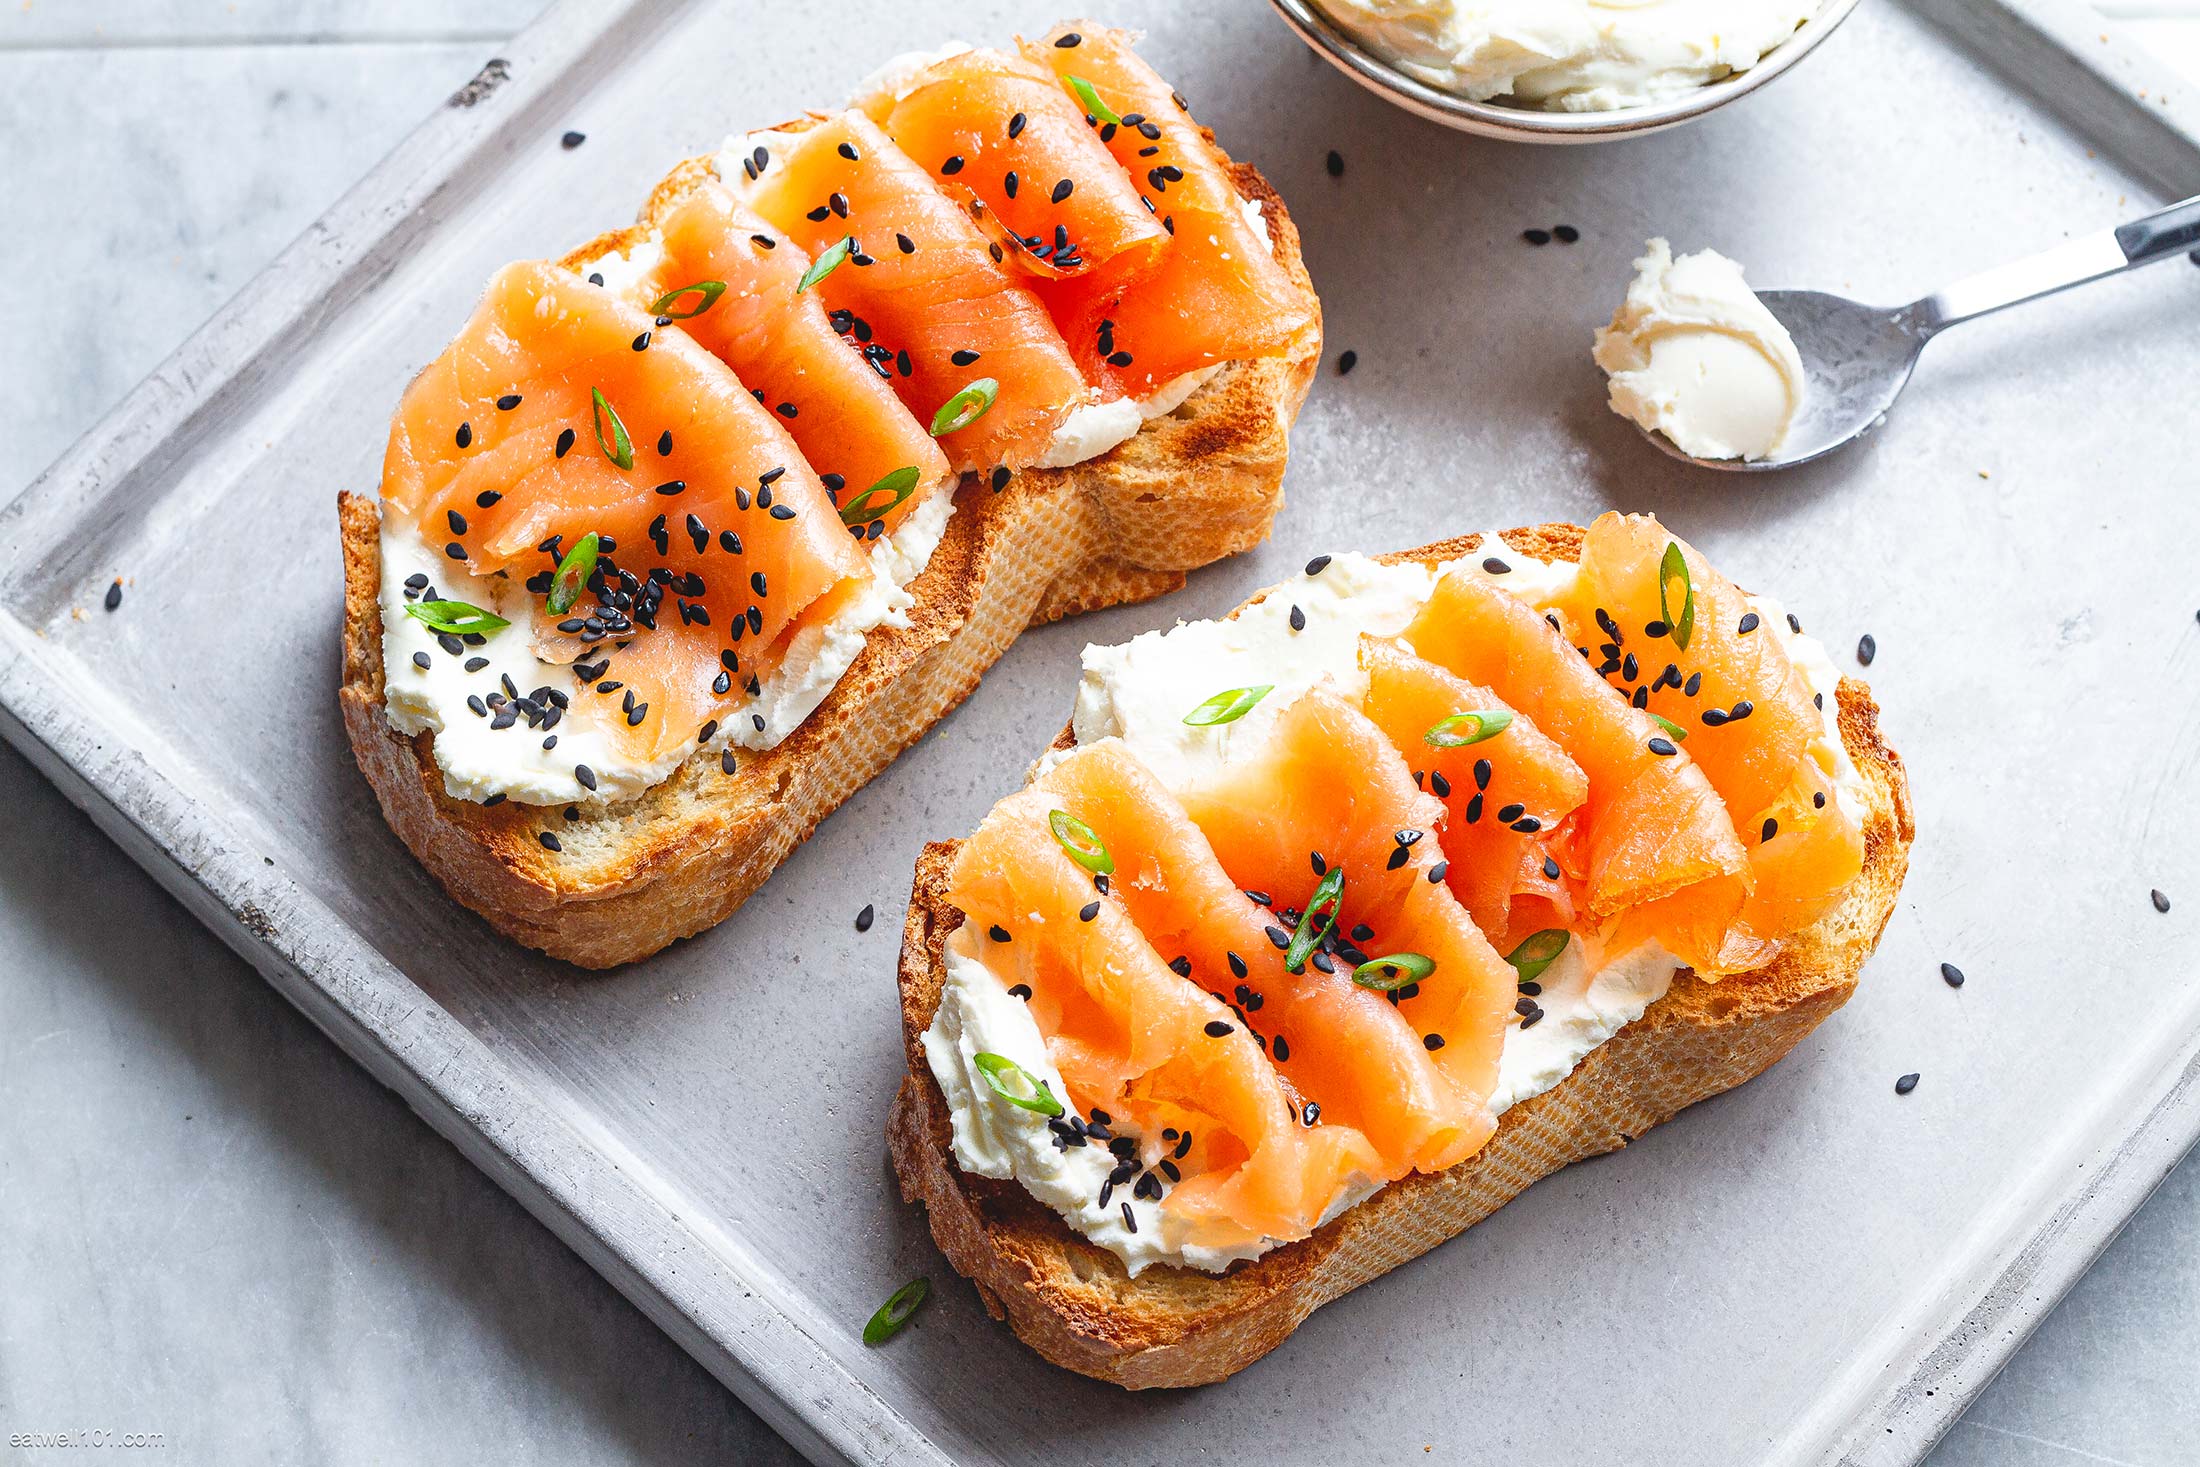 https://www.eatwell101.com/wp-content/uploads/2020/04/Smoked-Salmon-Toasts-with-Cream-Cheese-Recipe-10.jpg